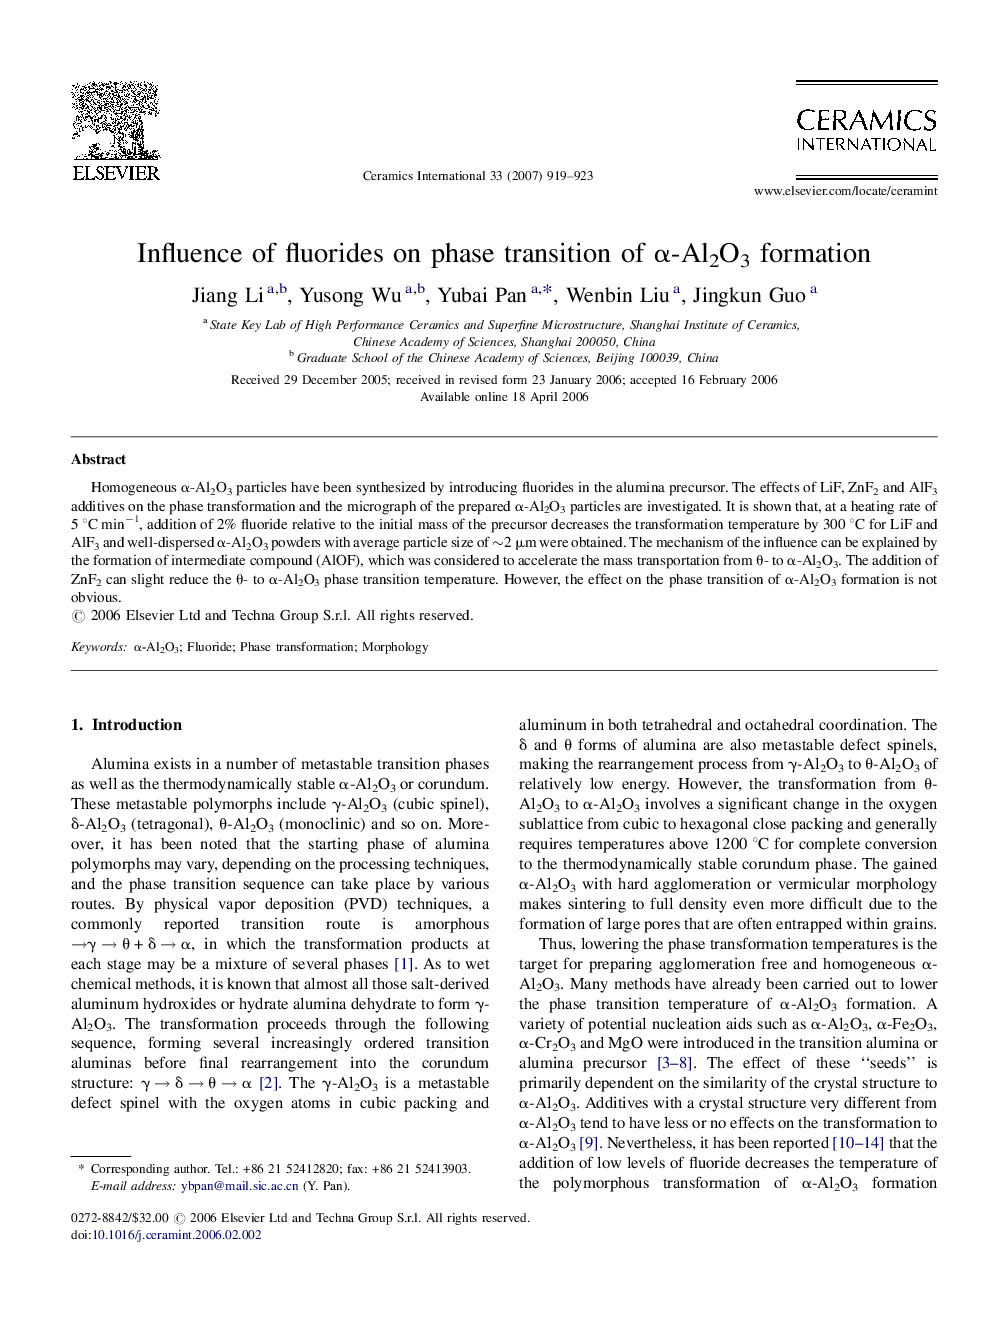 Influence of fluorides on phase transition of α-Al2O3 formation